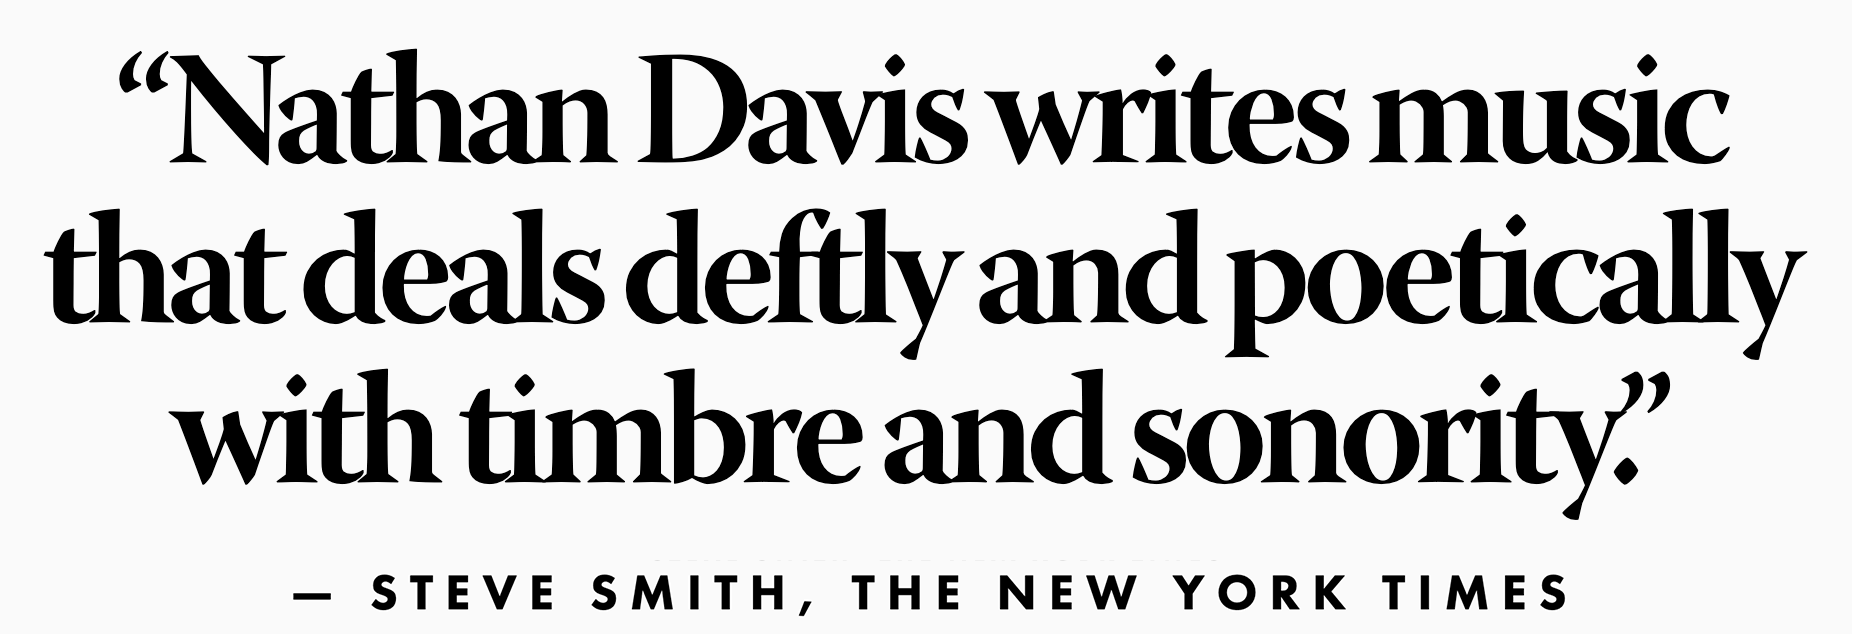 NYTimes_Smith_Clocher.png